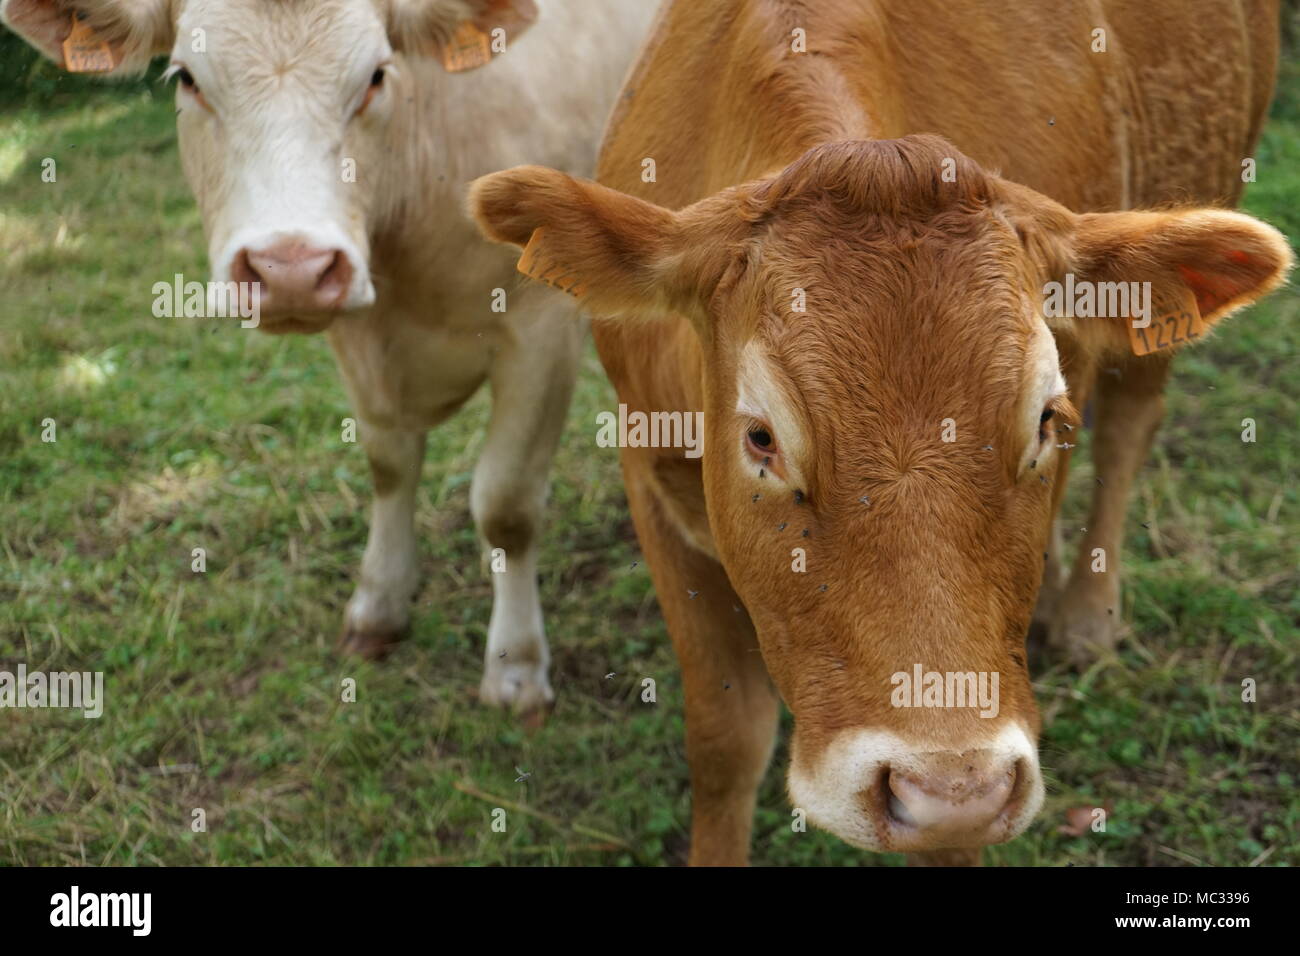 Brown and White Cows out at Pasture, Germany Stock Photo